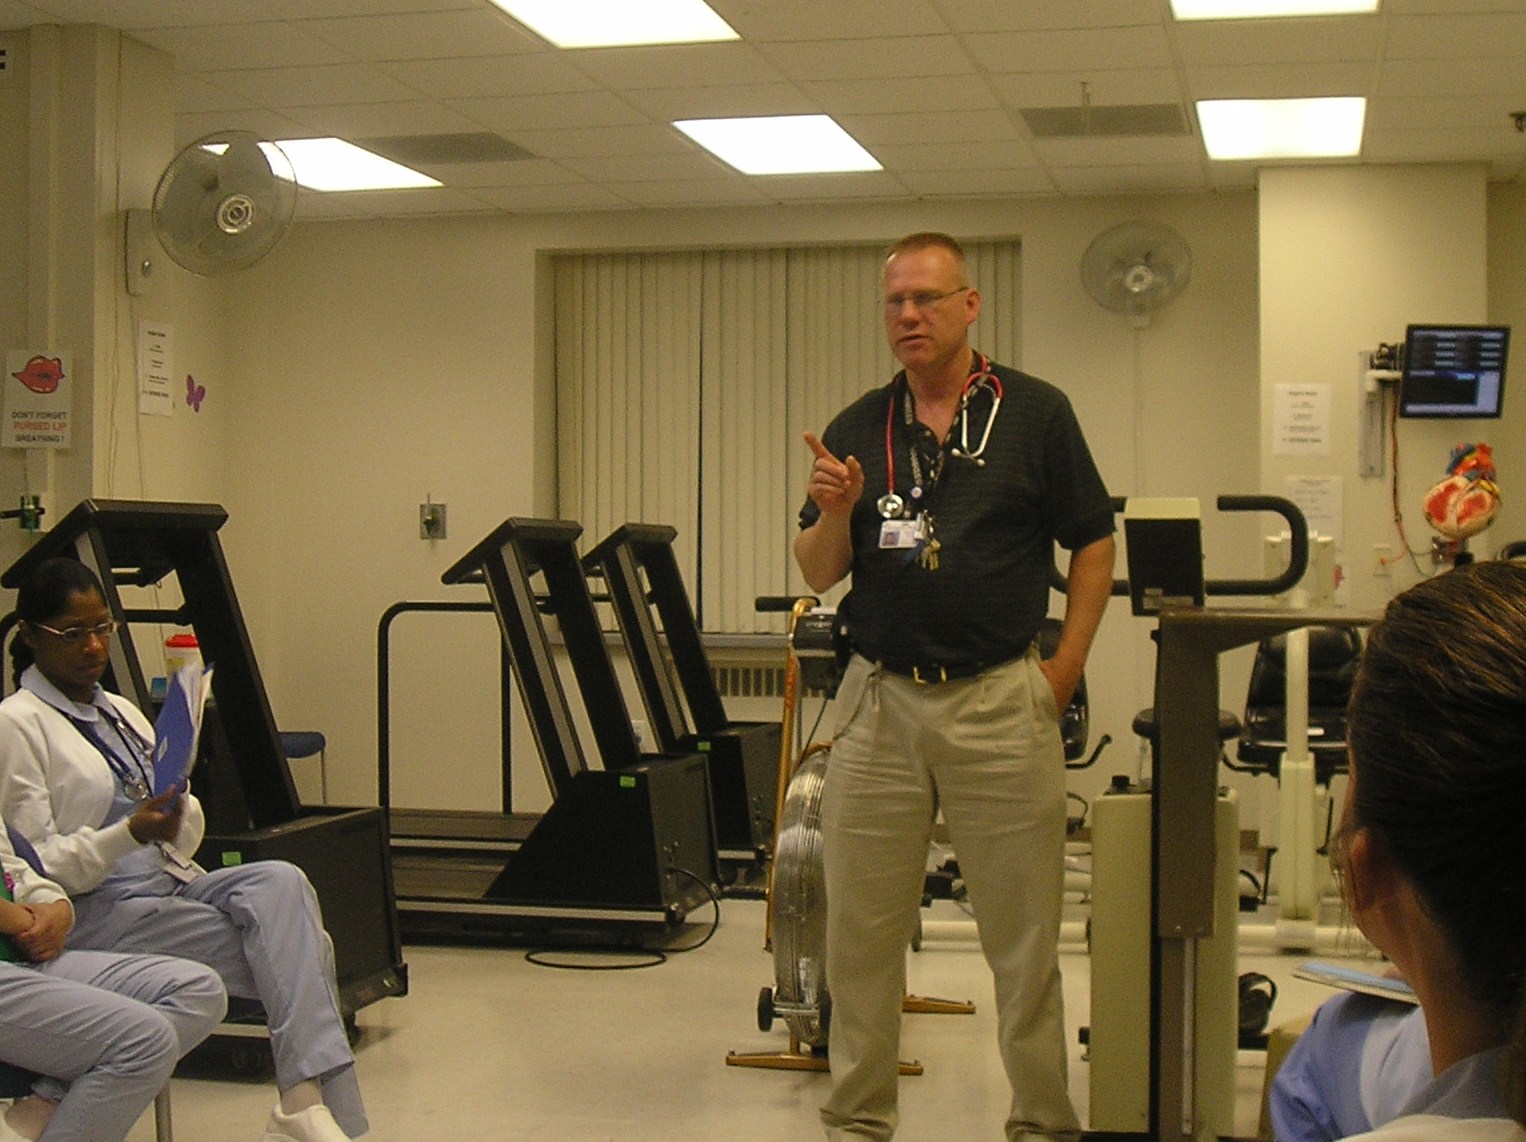 Christian Becker instructs a group of student nurses in his facility’s cardiopulmonary gym